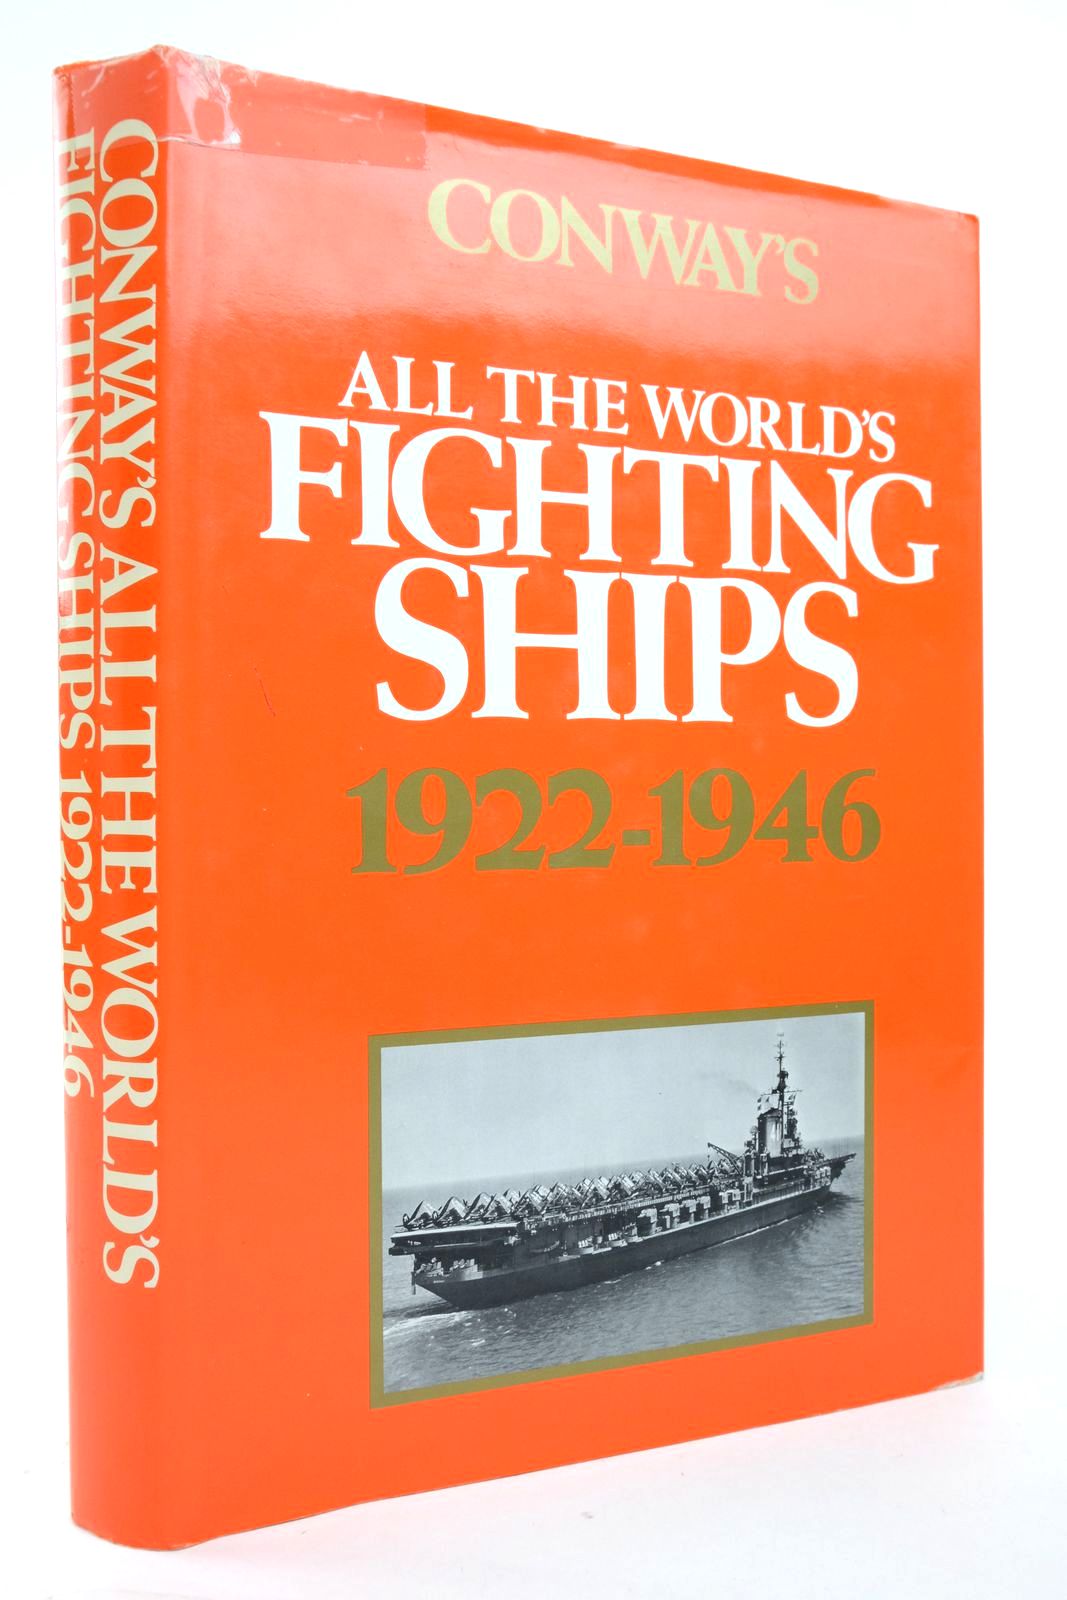 Photo of CONWAY'S ALL THE WORLD'S FIGHTING SHIPS 1922-1946 written by Gardiner, Robert Chesneau, Roger published by Conway Maritime Press (STOCK CODE: 2136663)  for sale by Stella & Rose's Books